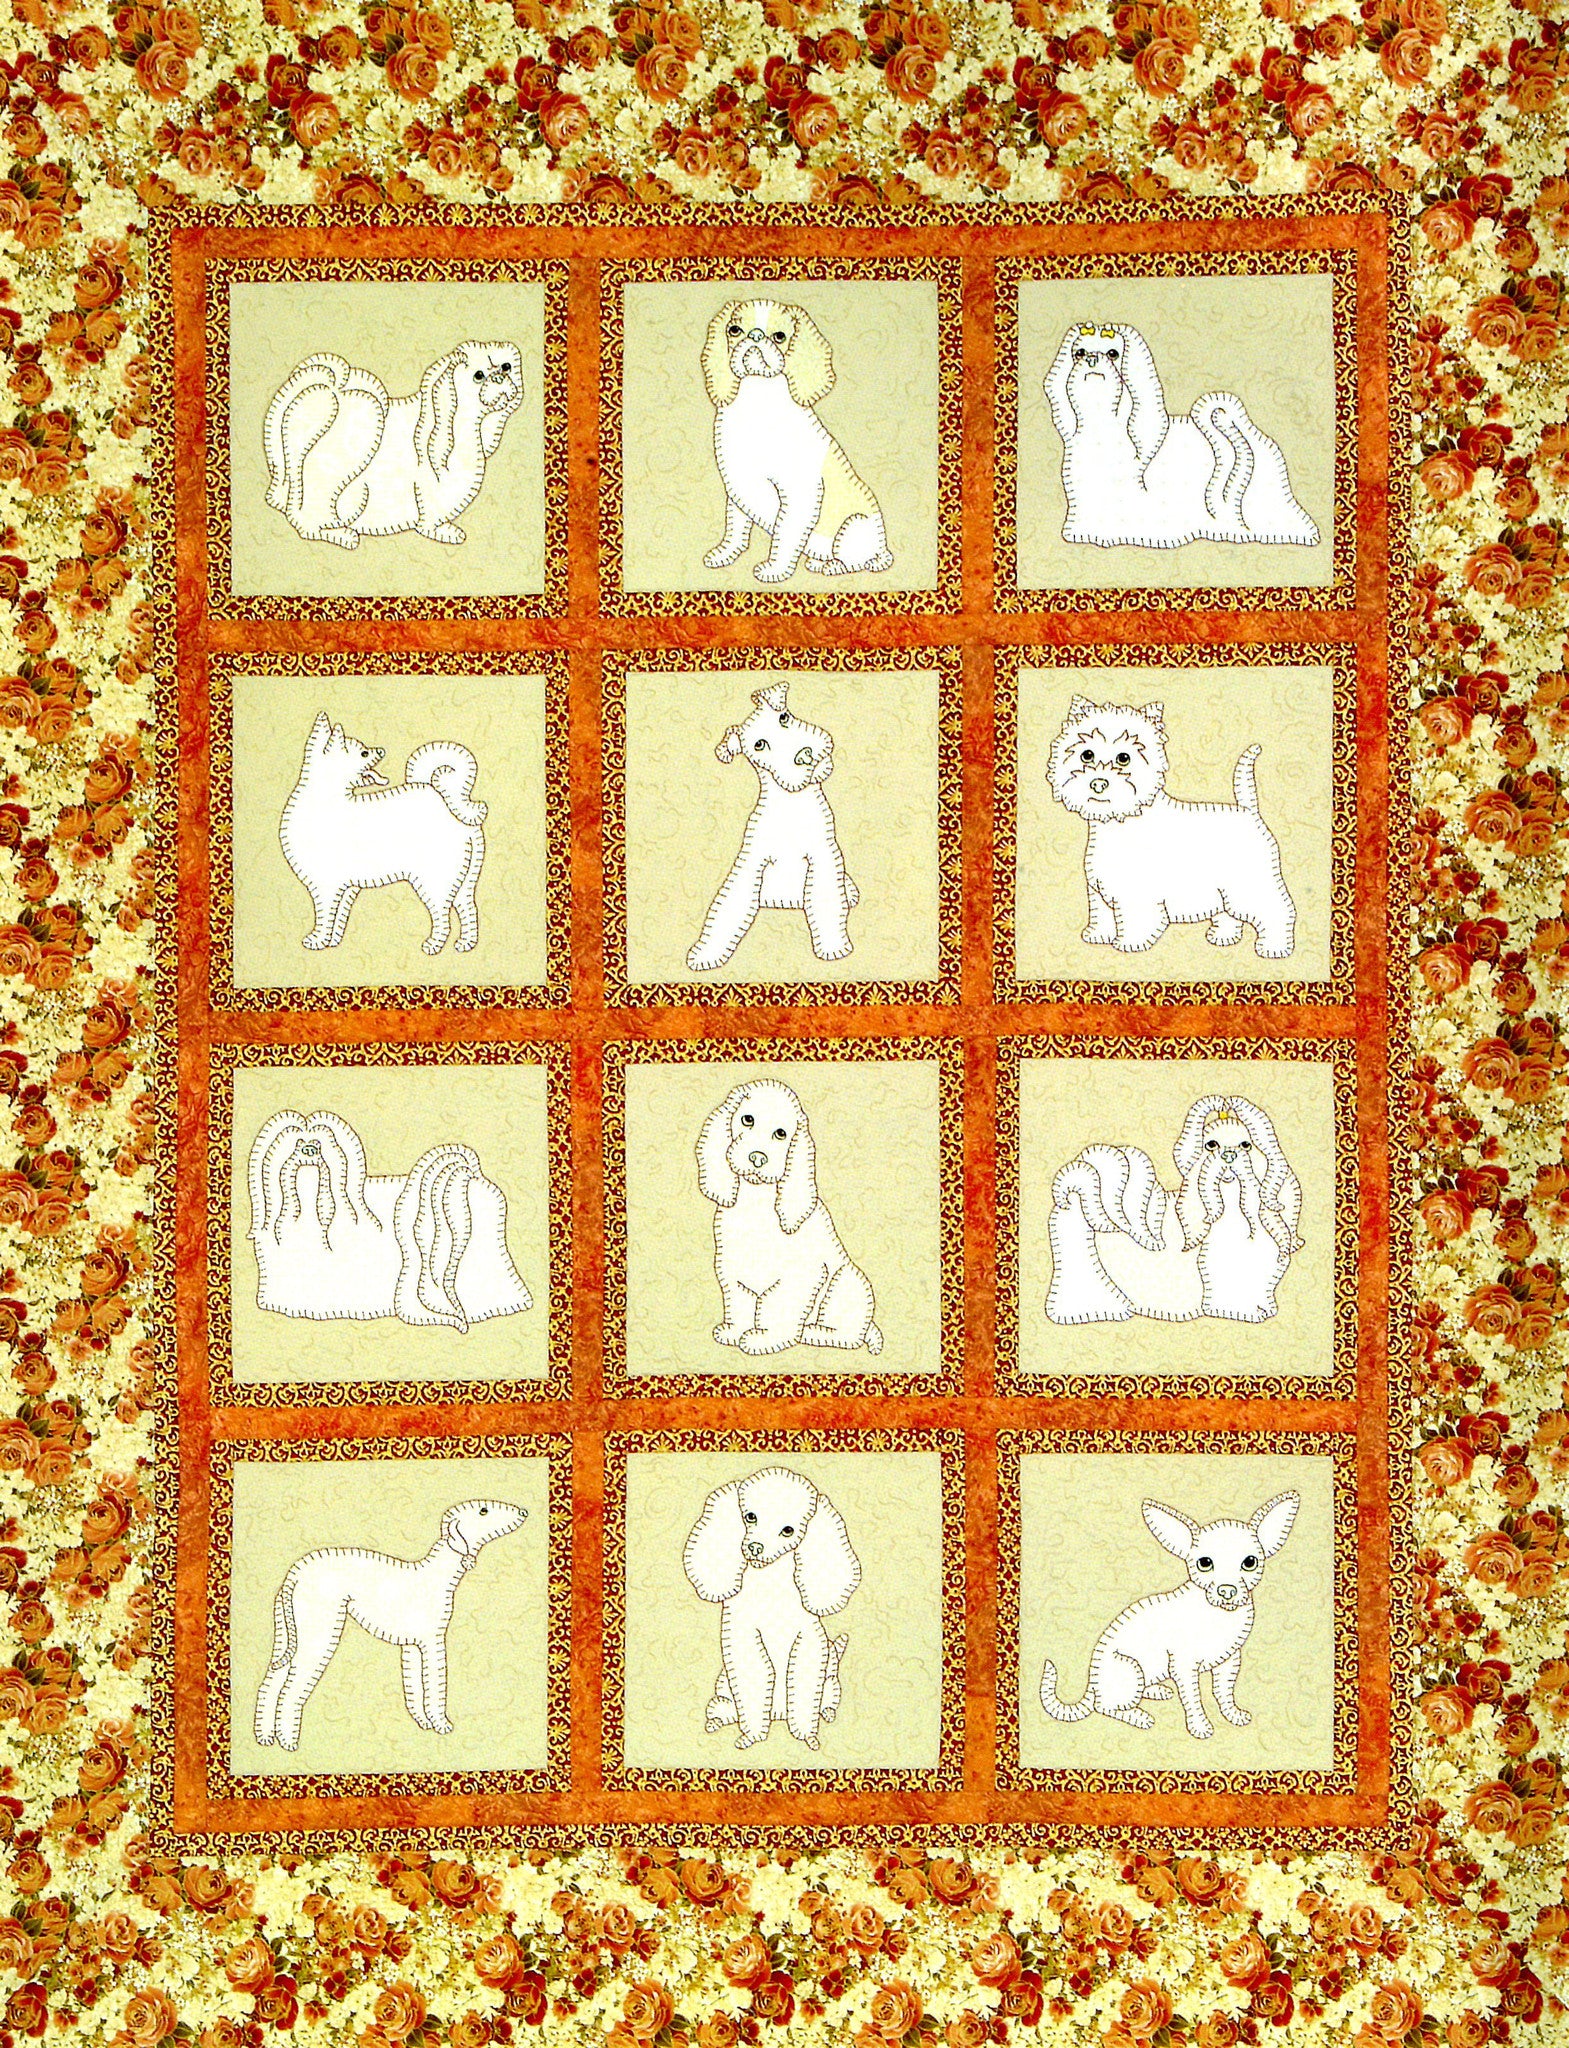 Ashton Publications -- A Quilting Blog  Applique Quilt Books, Patterns,  and Tutorials for Animal and Nature Lovers